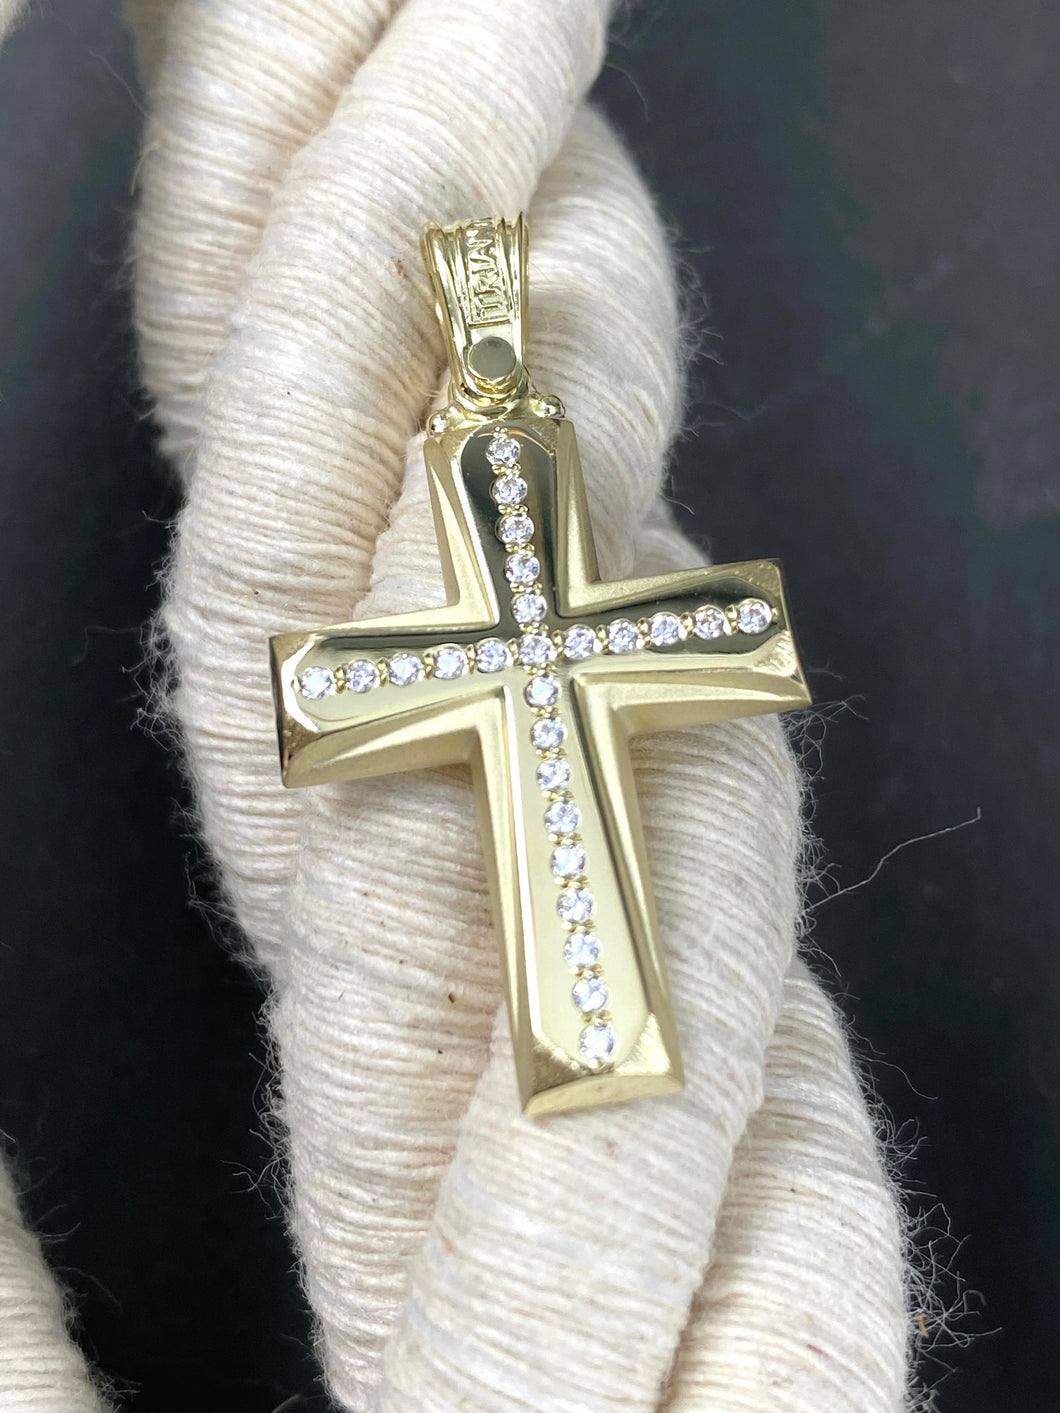 Triantos 14k 2 Tone White and Yellow Gold Polished and Brushed Cross with Precious Stones 4.04g